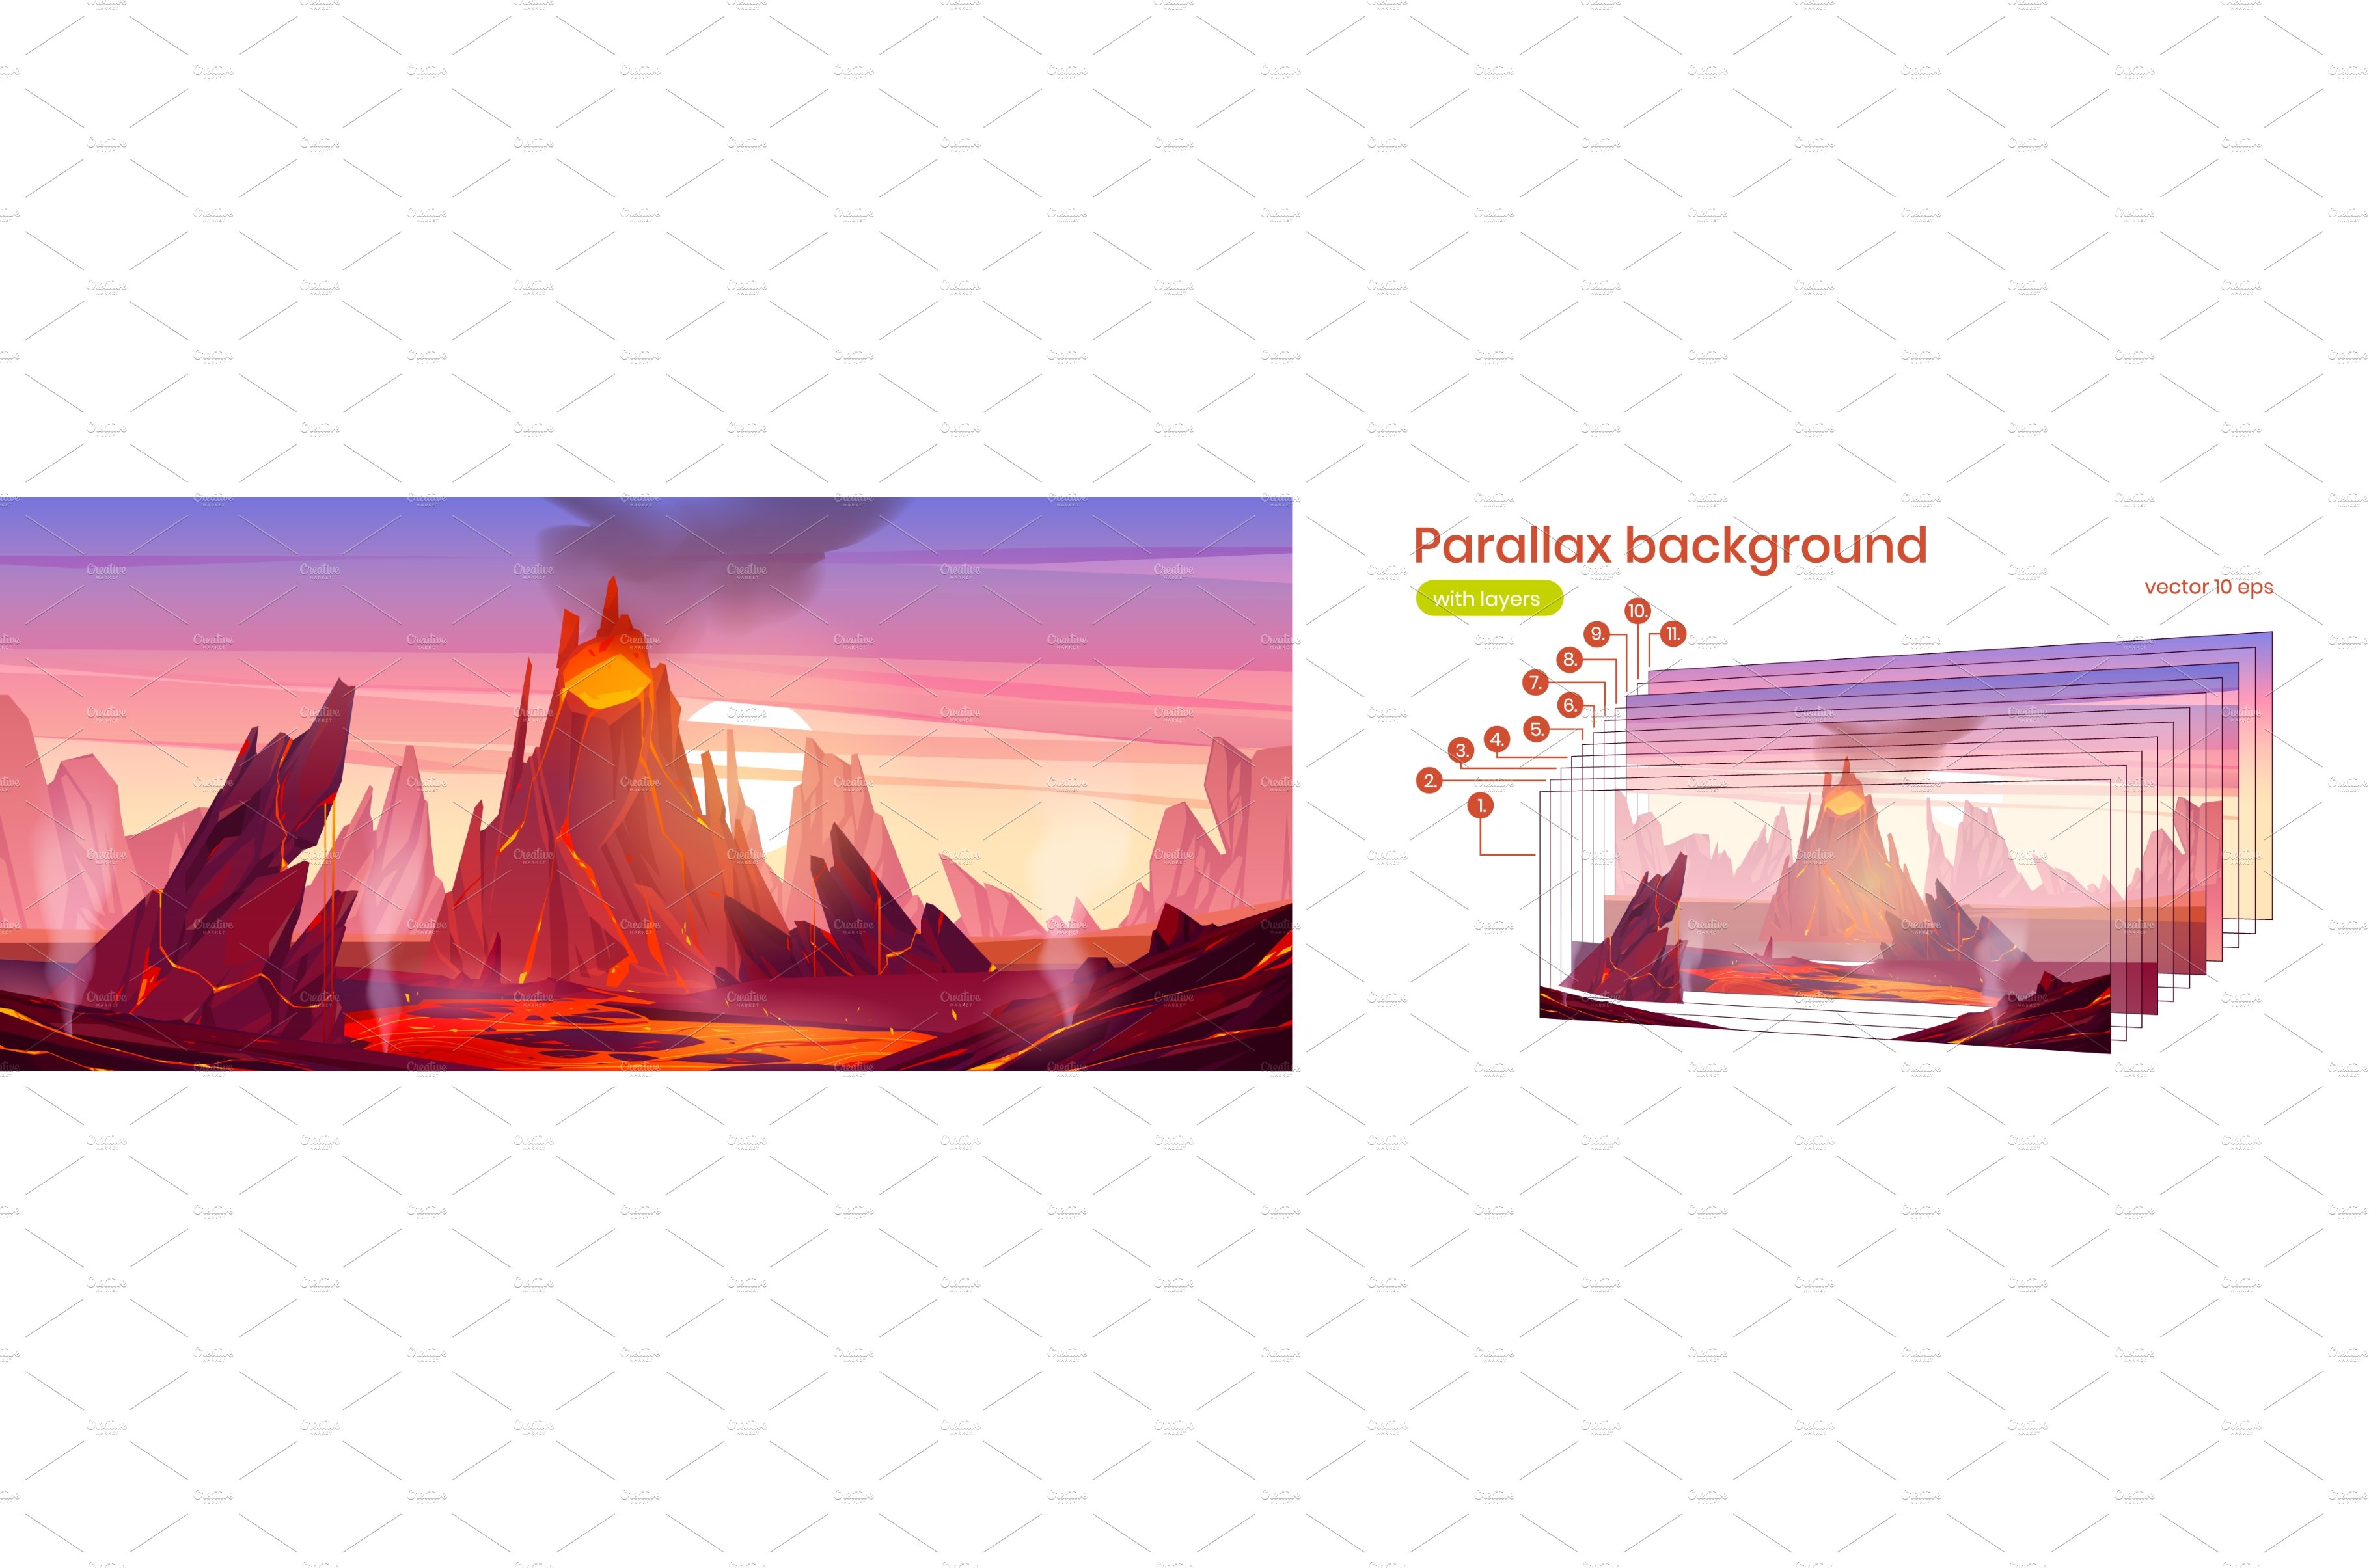 Parallax background with volcanic cover image.